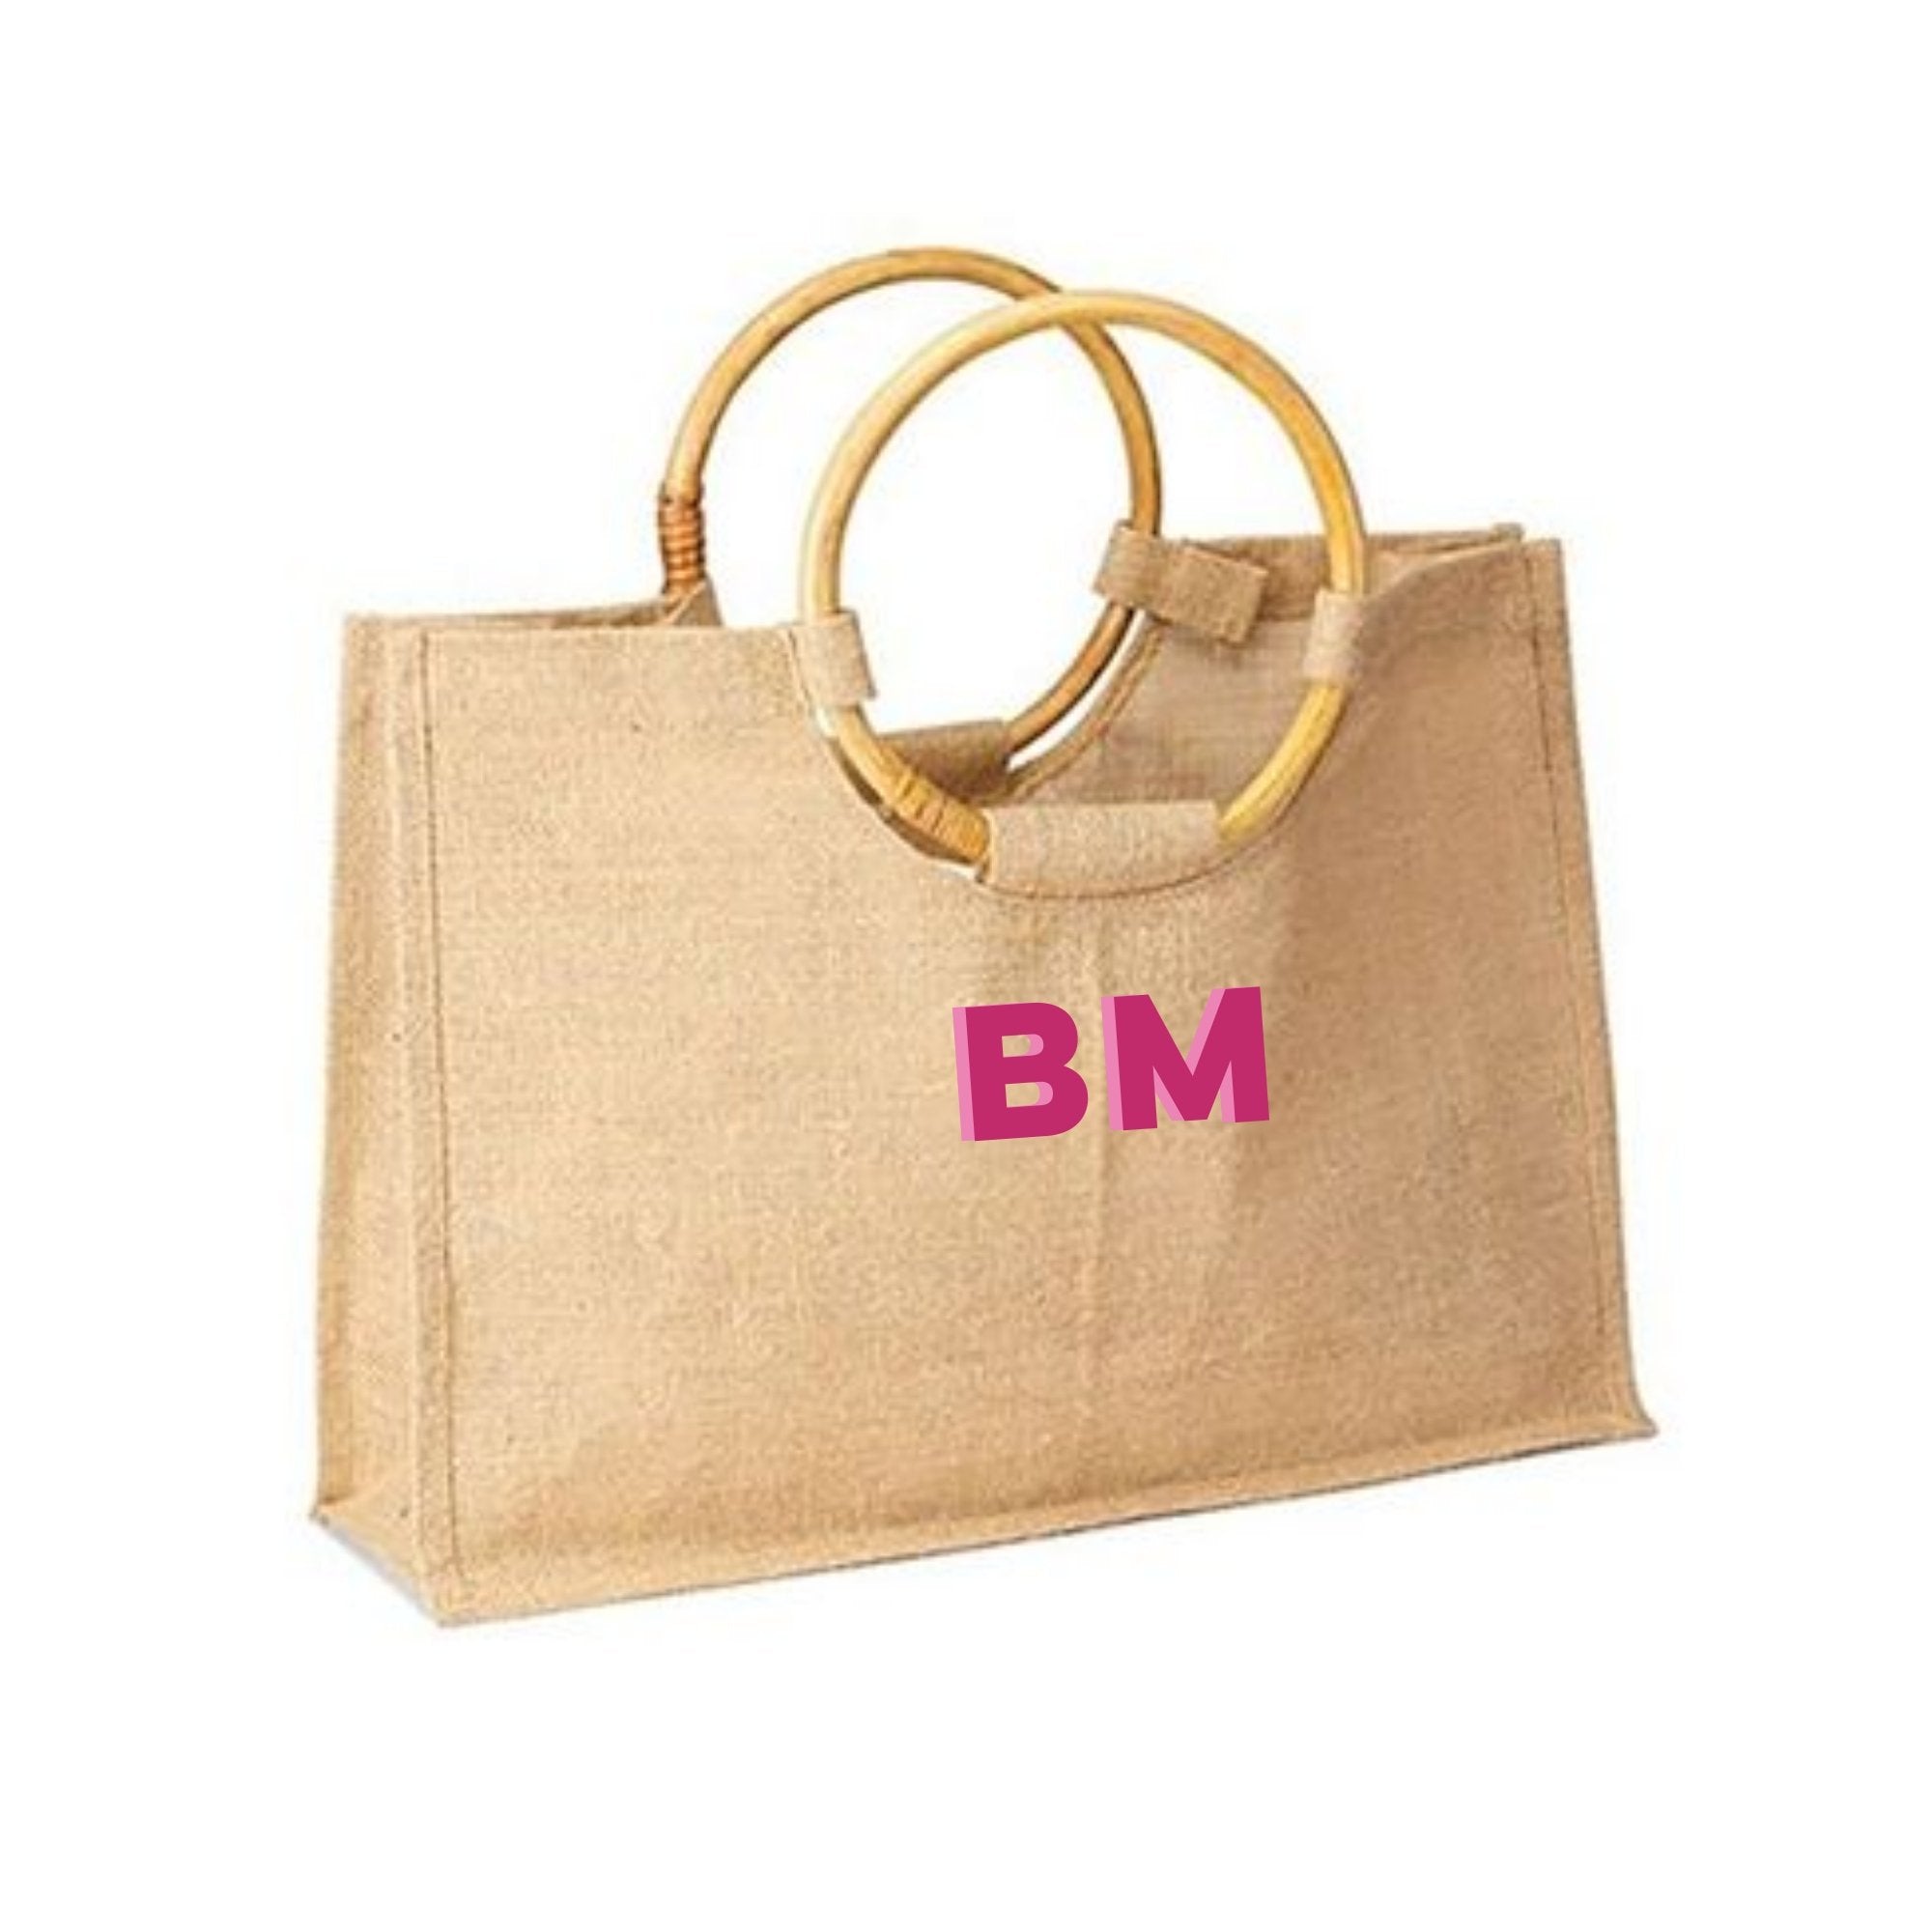 A bamboo jute is customized with a pink monogram 